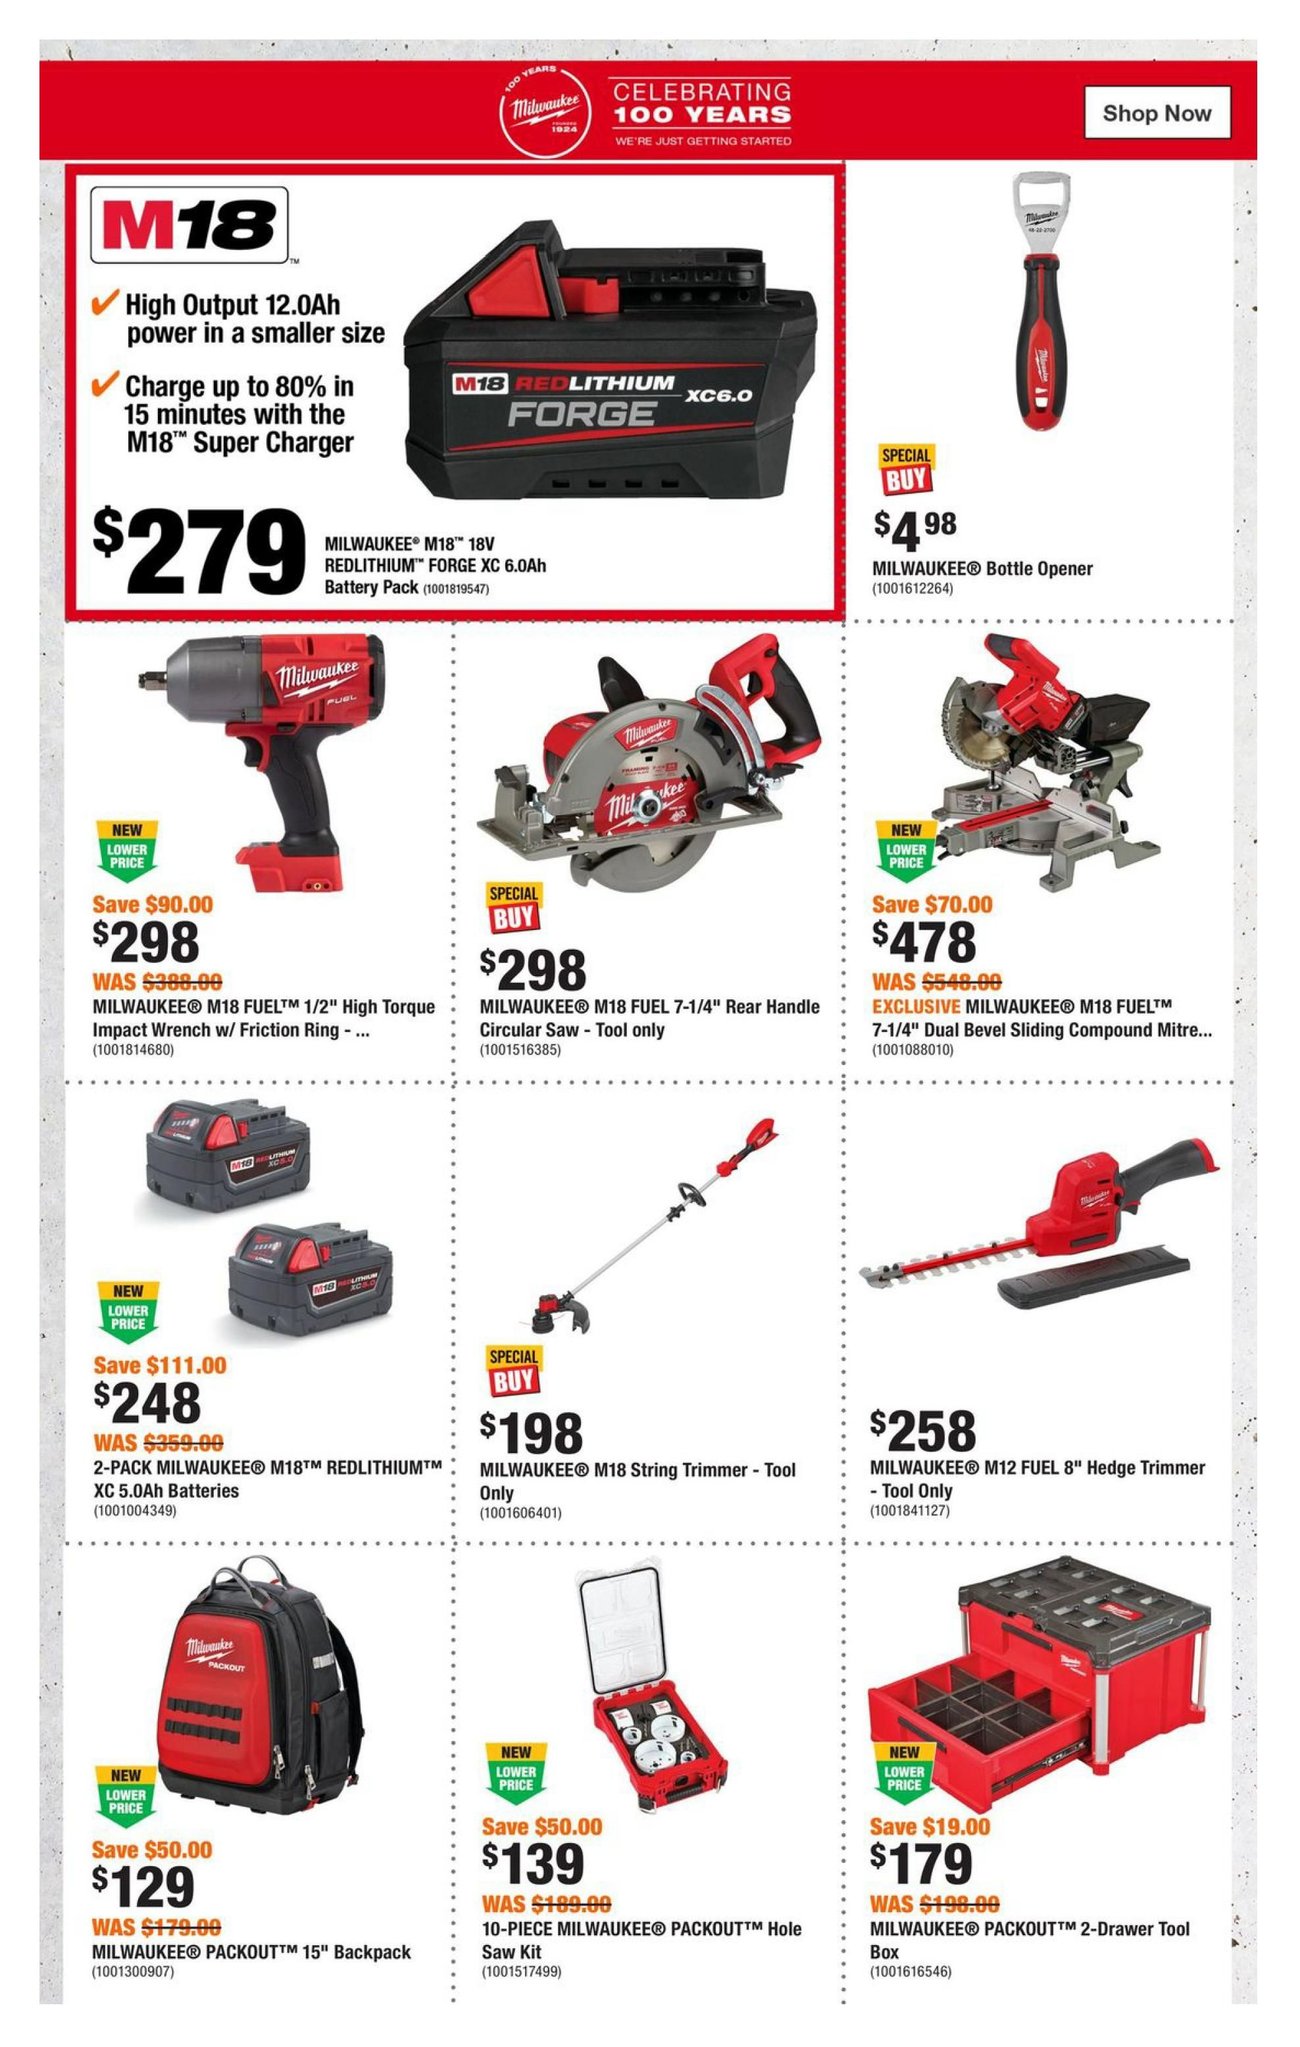 Home Depot - Father's Day Gift Guide - Page 6